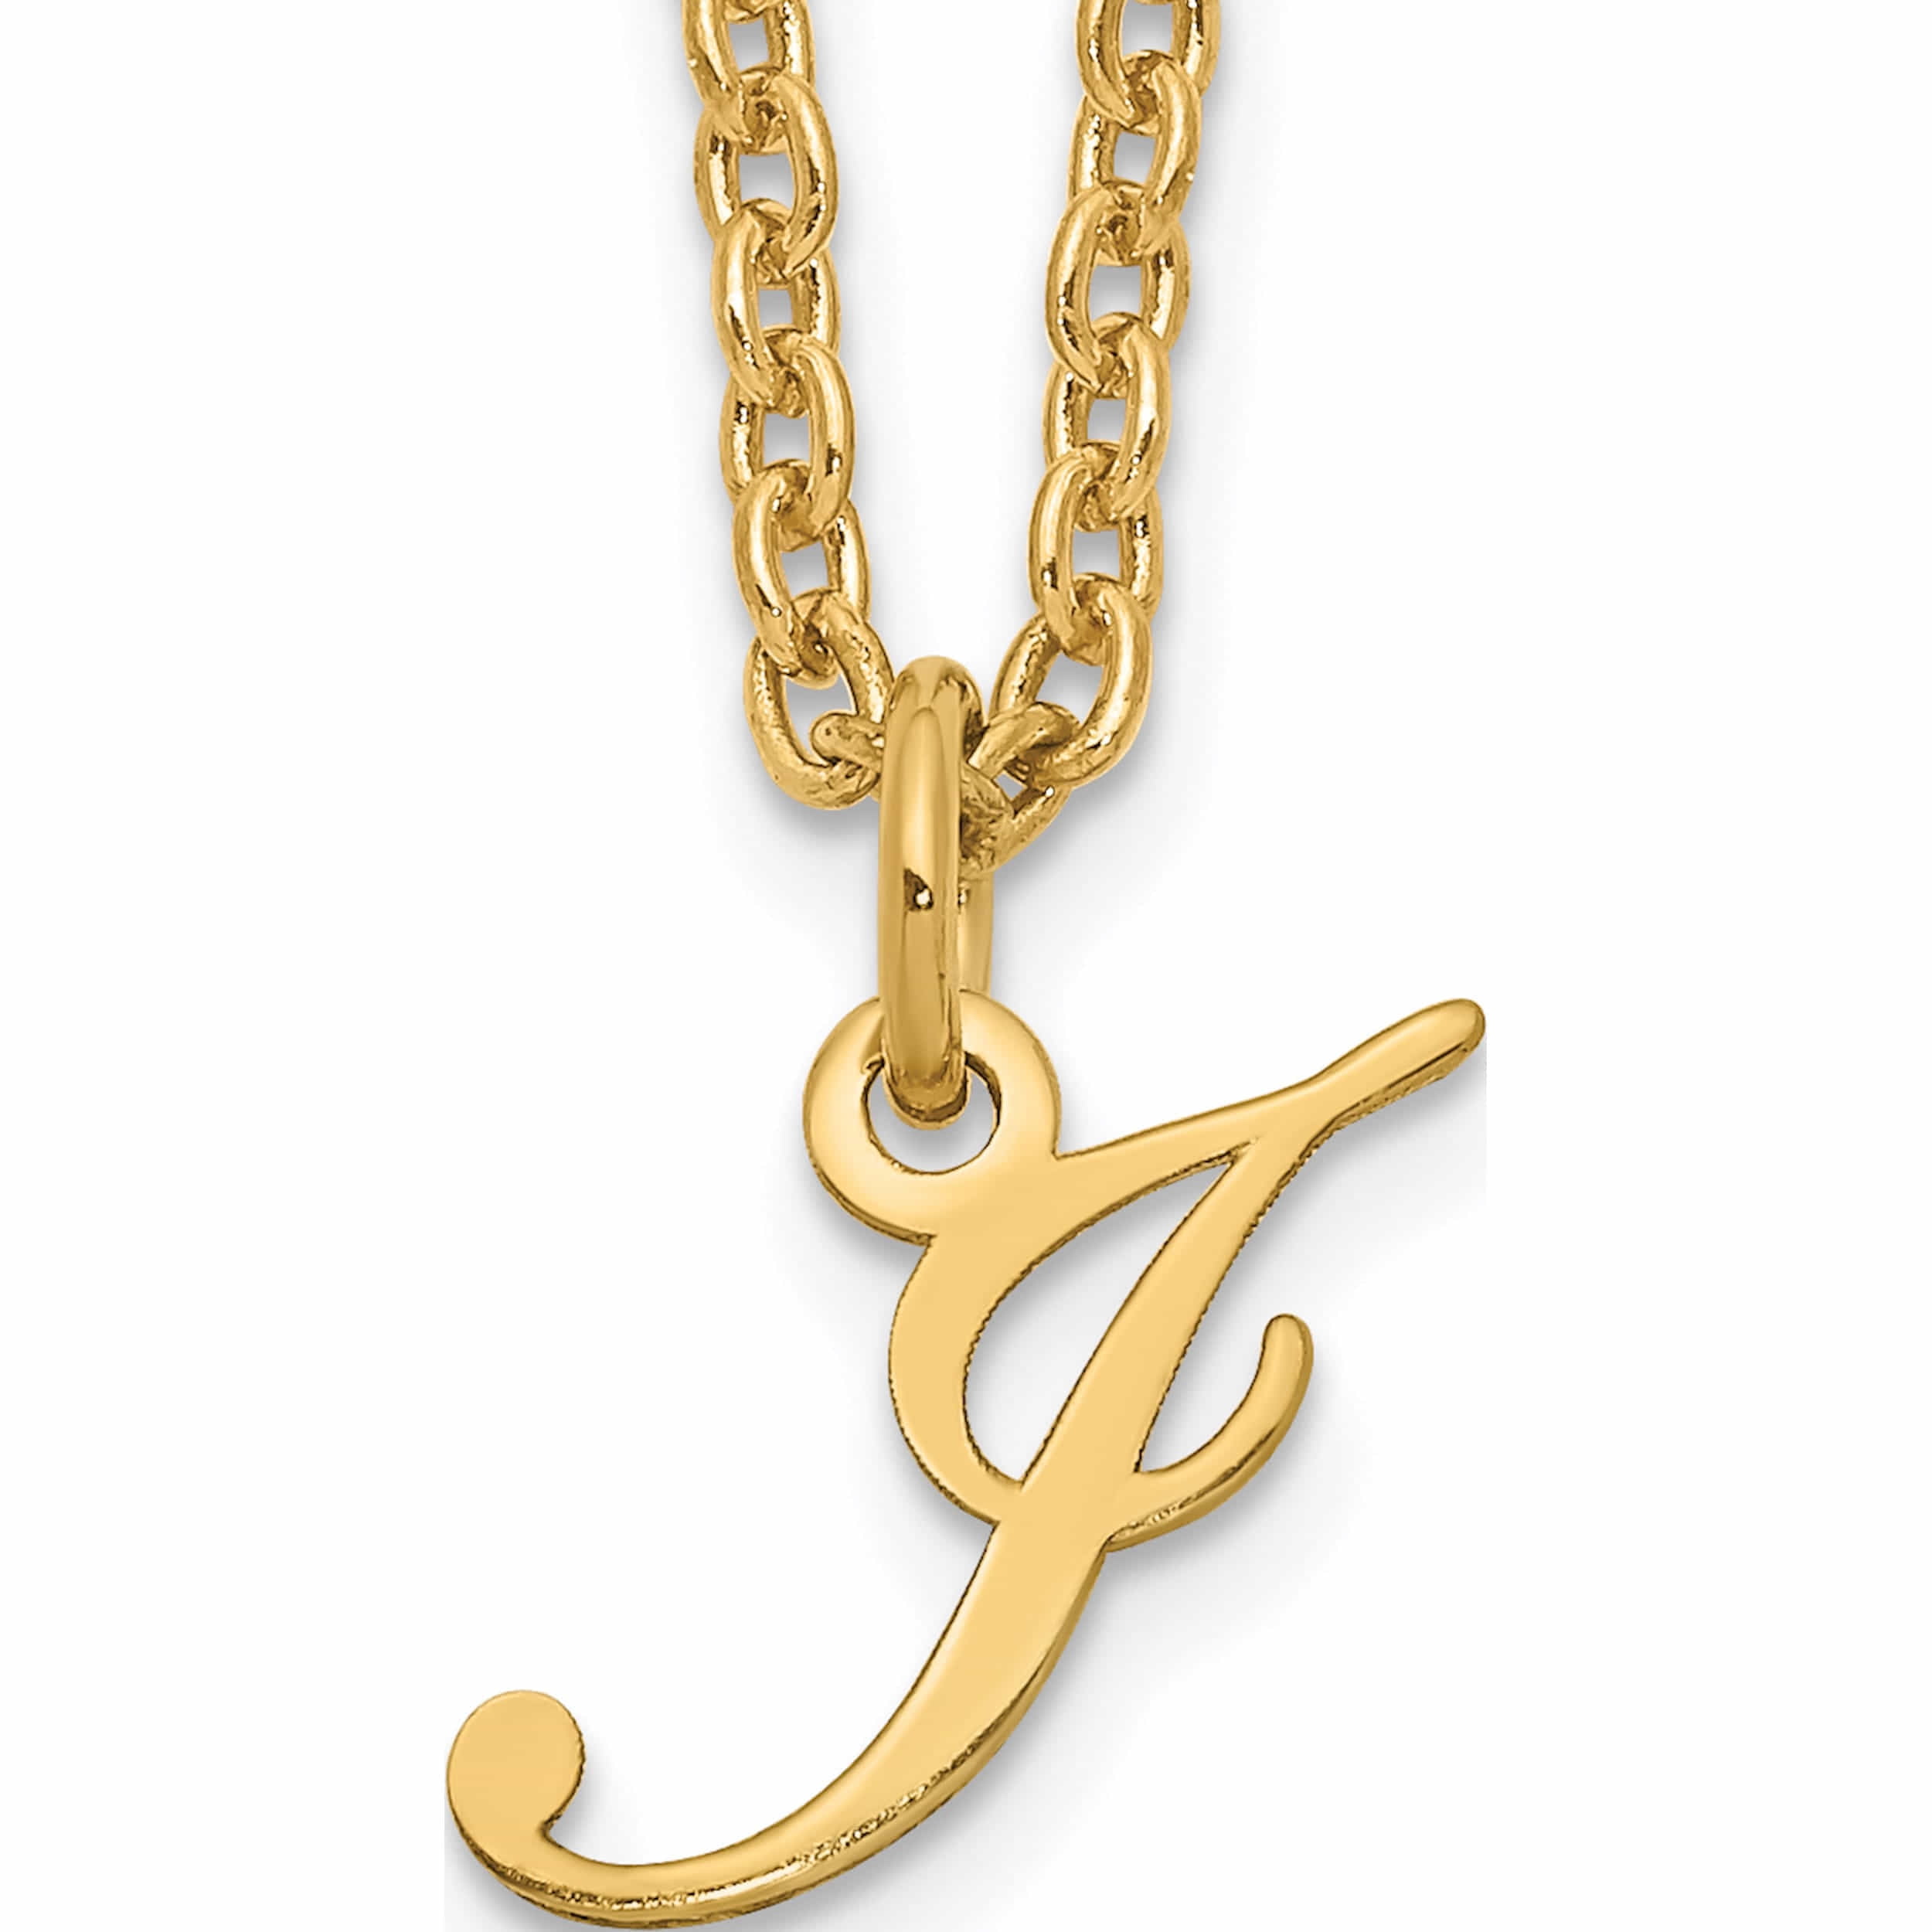 Custom Made with 3 Initials! 18k Yellow Gold Plated Tree Necklace with Sterling Silver Initial Birds 